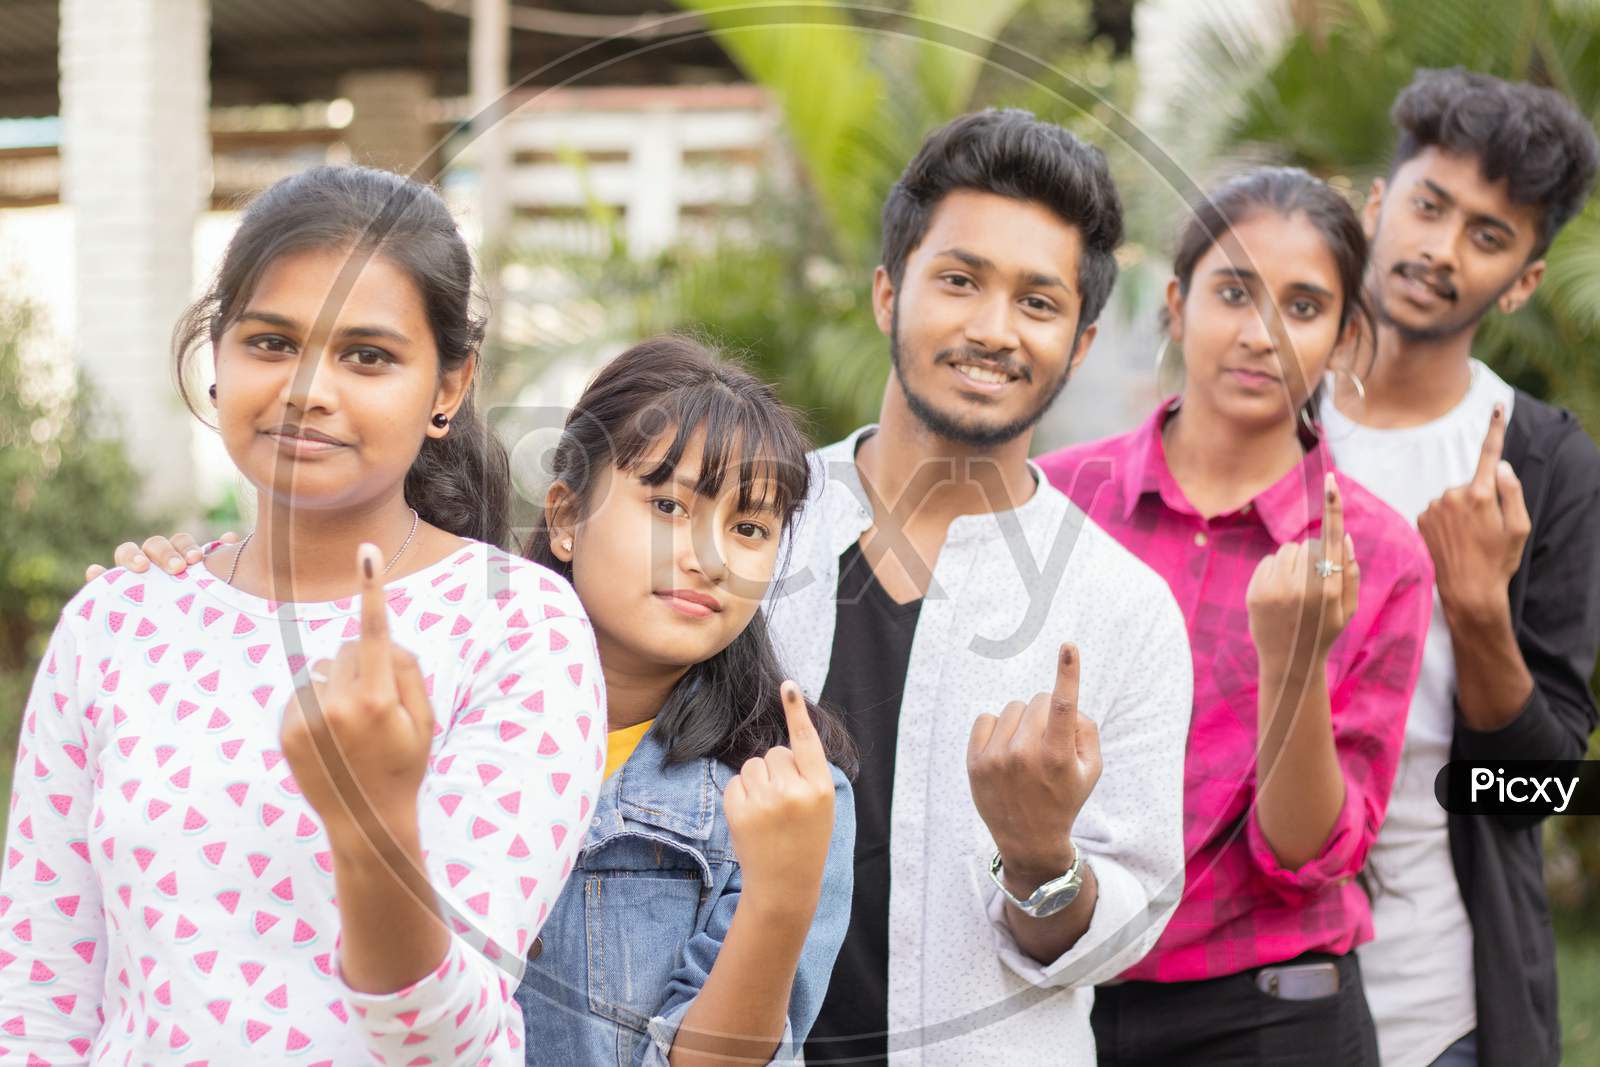 Group Of Teenager Friends Showing Ink Marked Fingers Outside Polling Station Or Booth After Casting Votes - Concept Of Indian Election Or Vote Casting System.